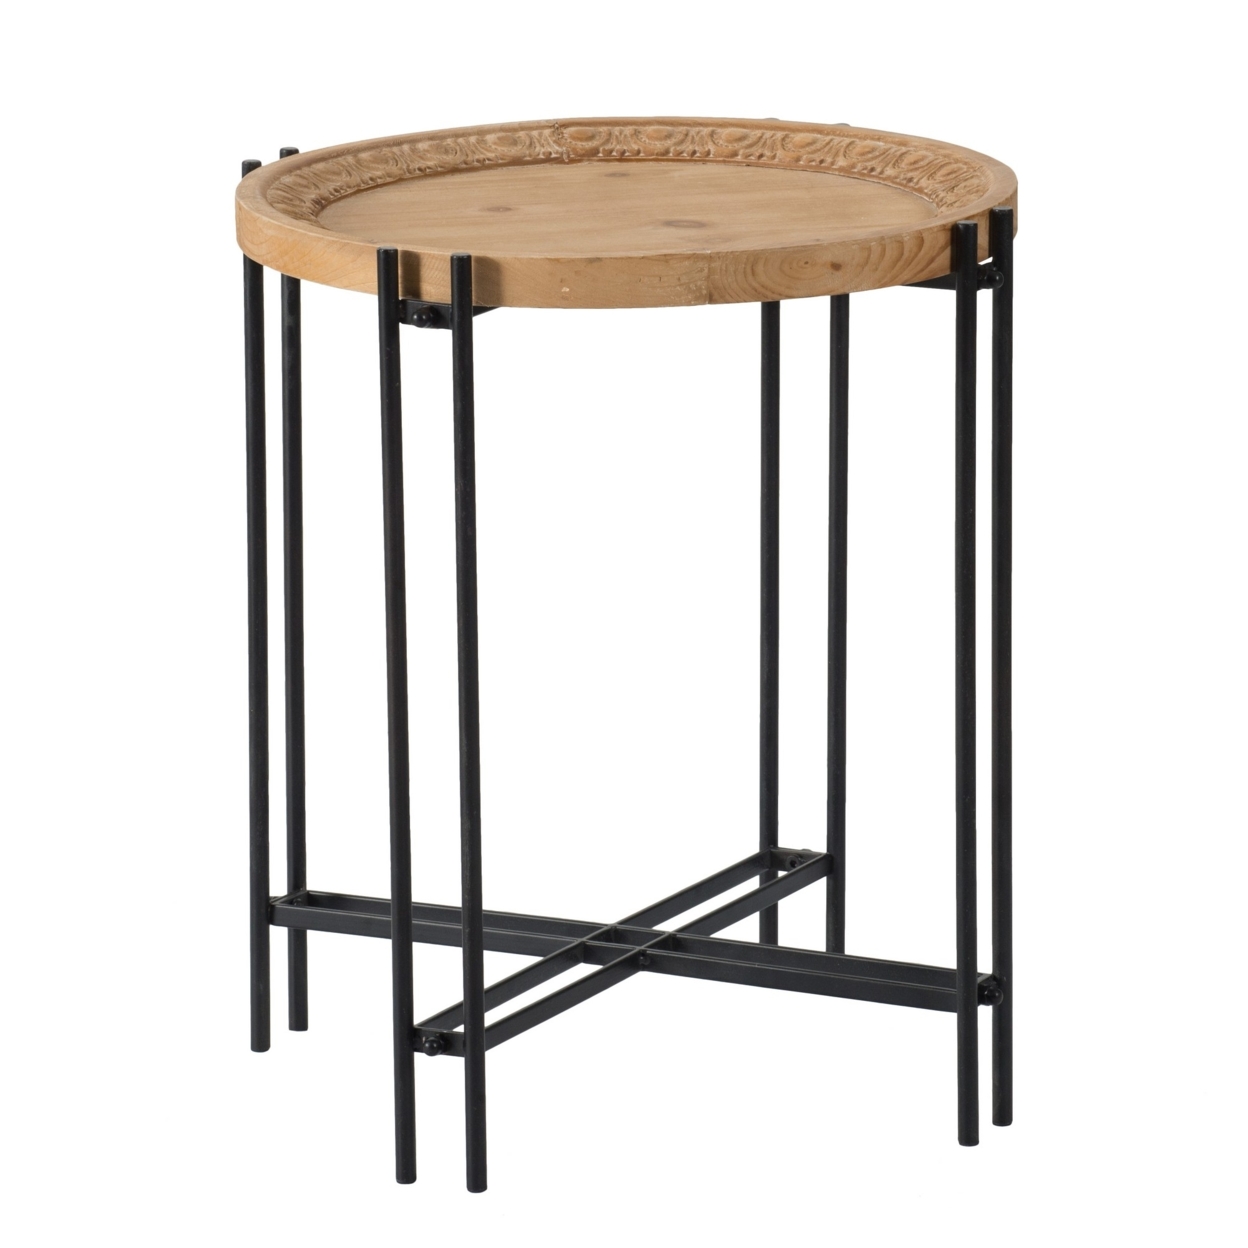 24 Inch Side Table, Modern, Round Tabletop, Carved Wood, Iron Frame, Brown- Saltoro Sherpi